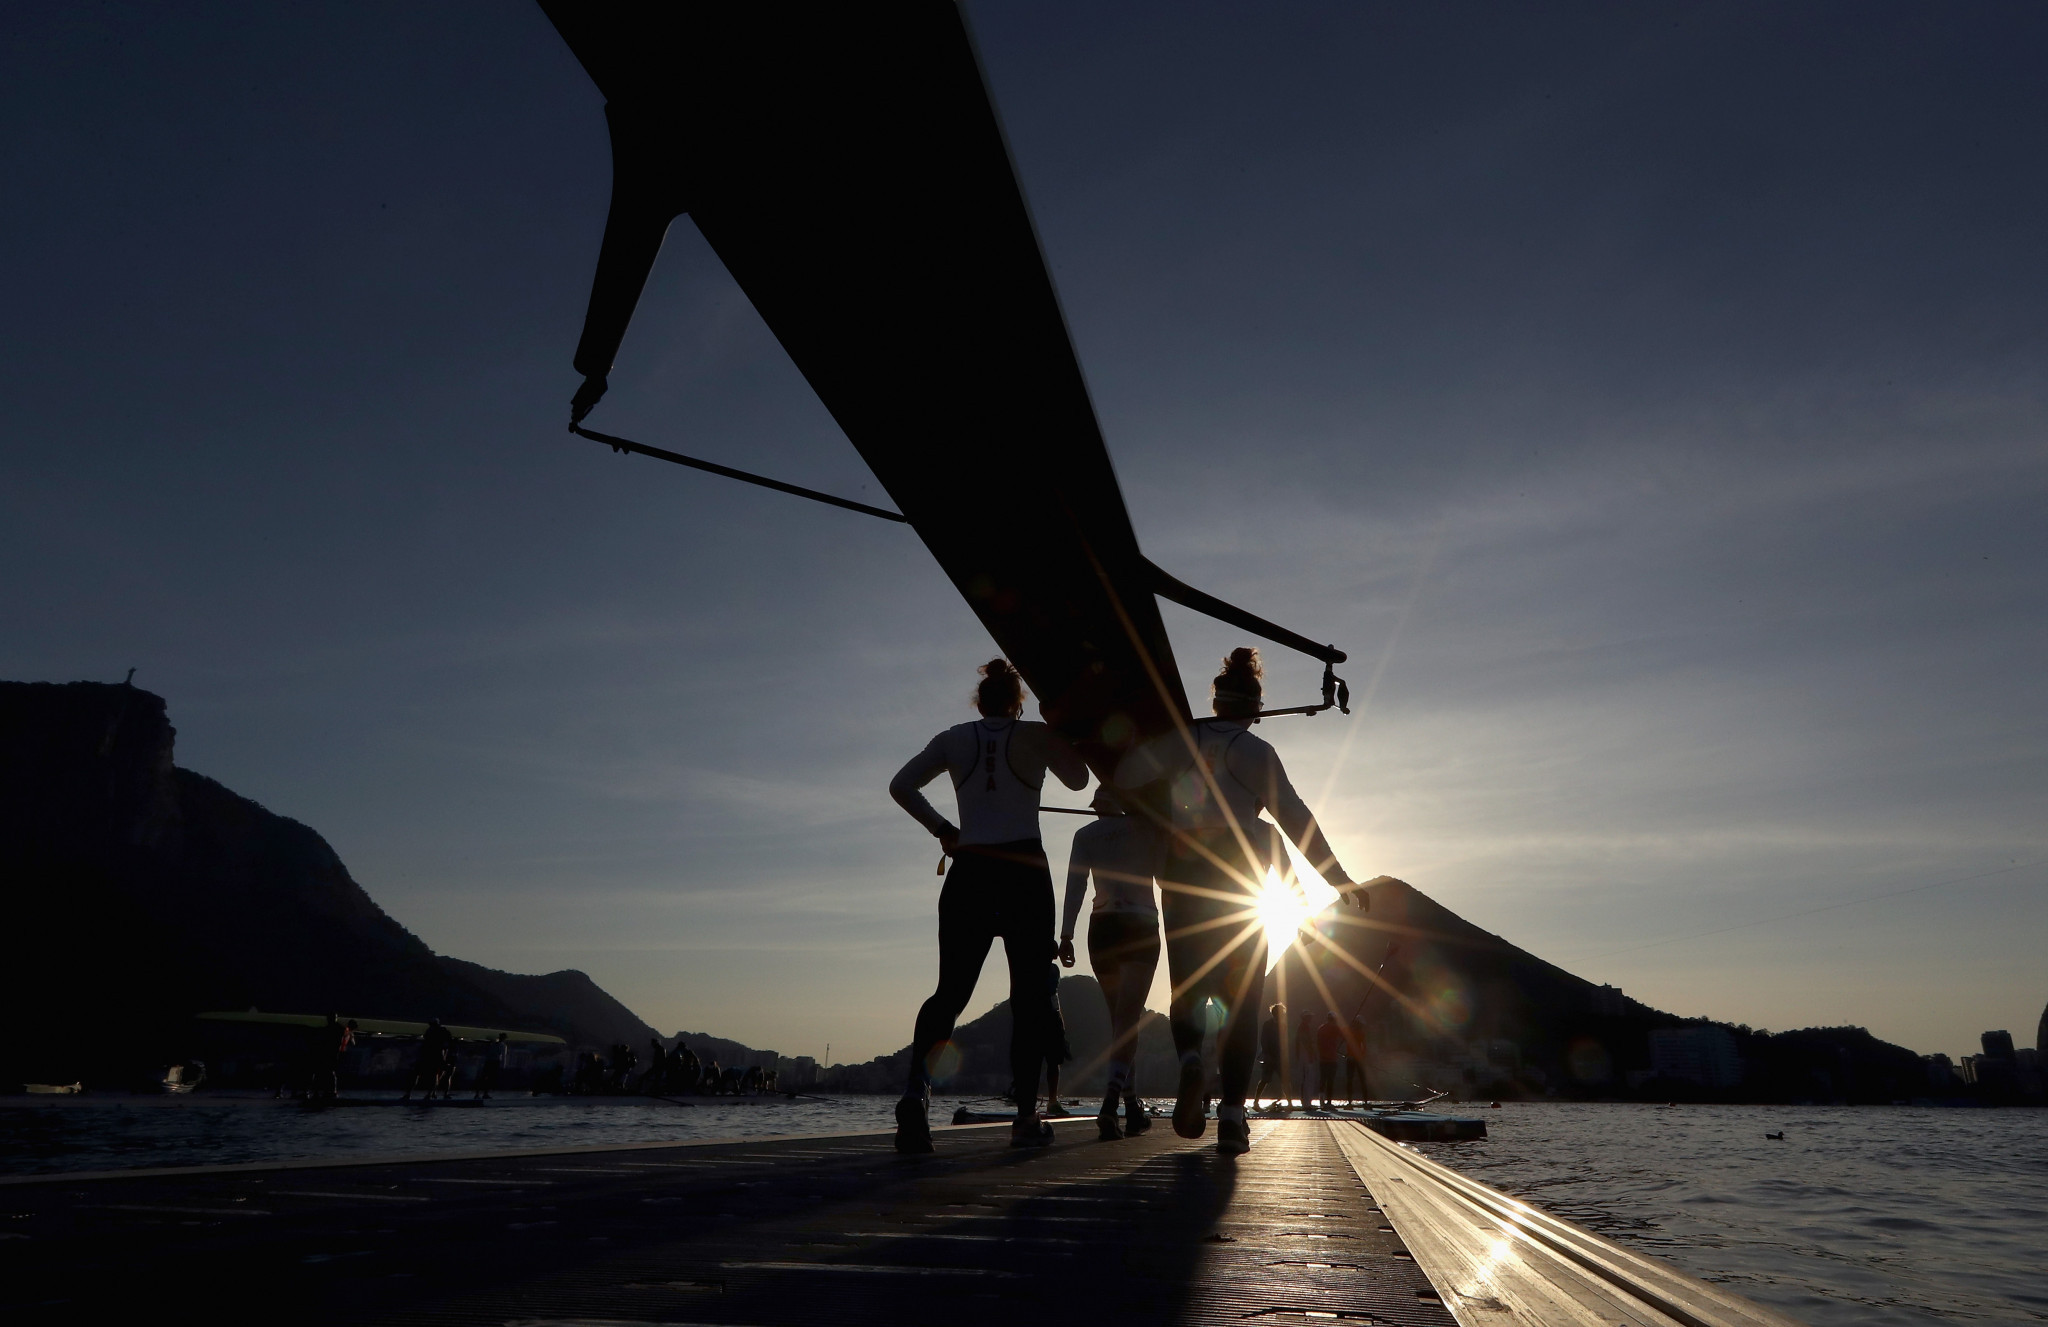 Heats completed on day two of World Rowing Junior Championships